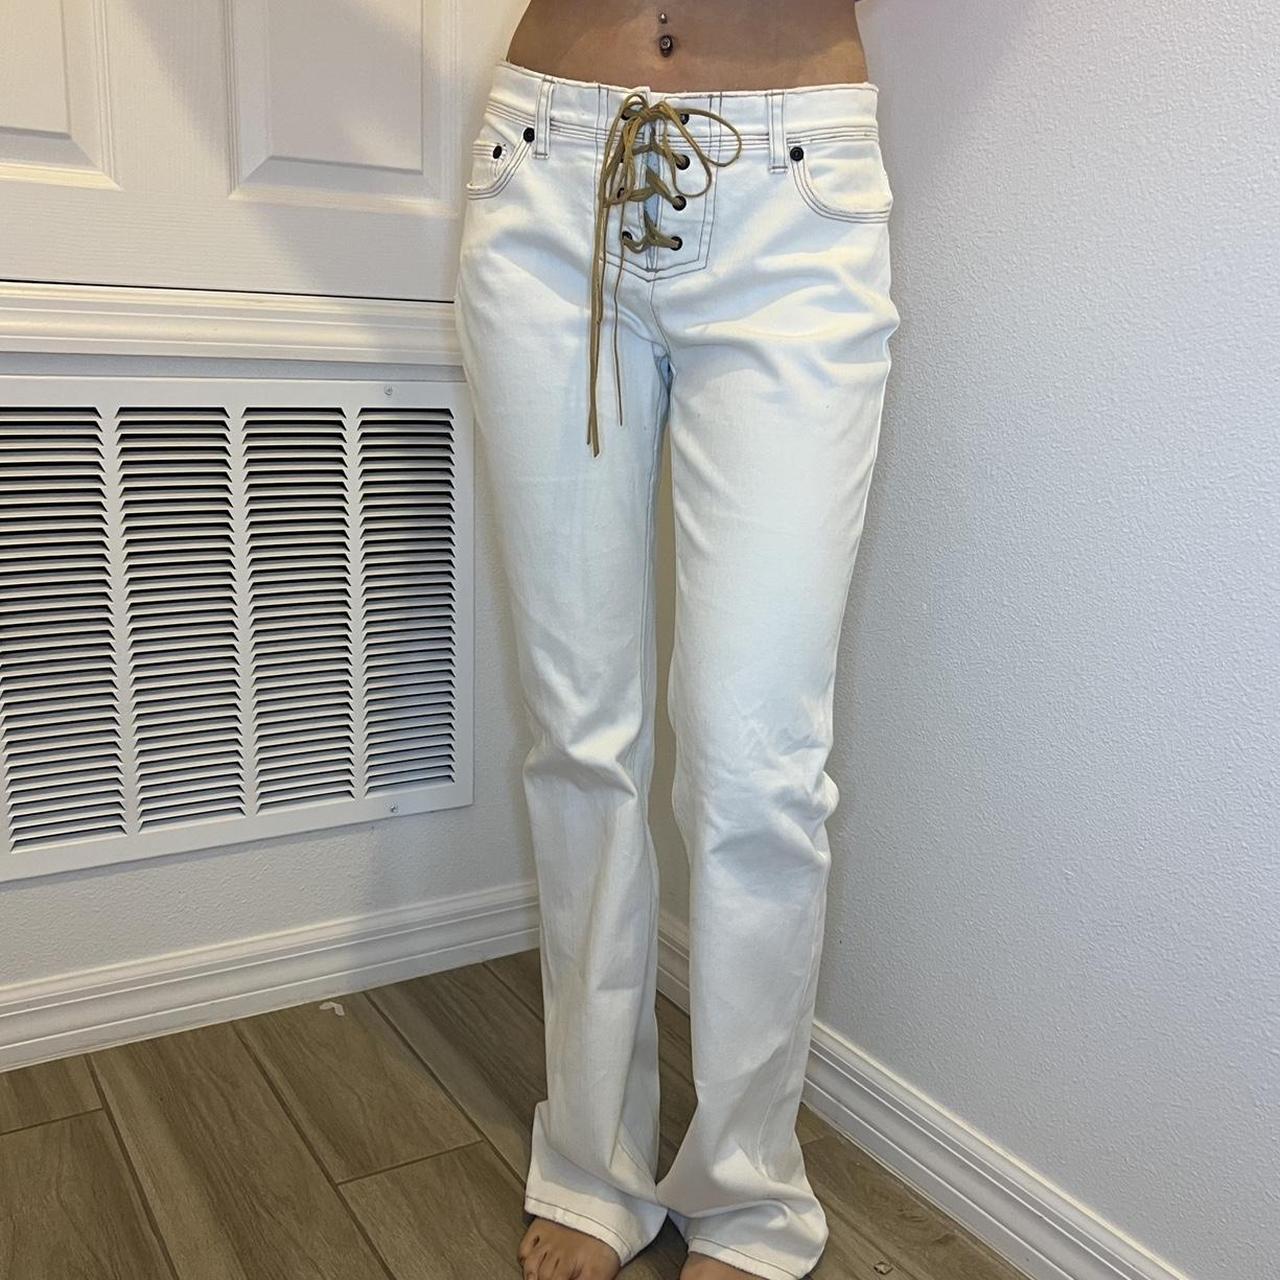 Low rise white jeans with suede lace tie up These... - Depop